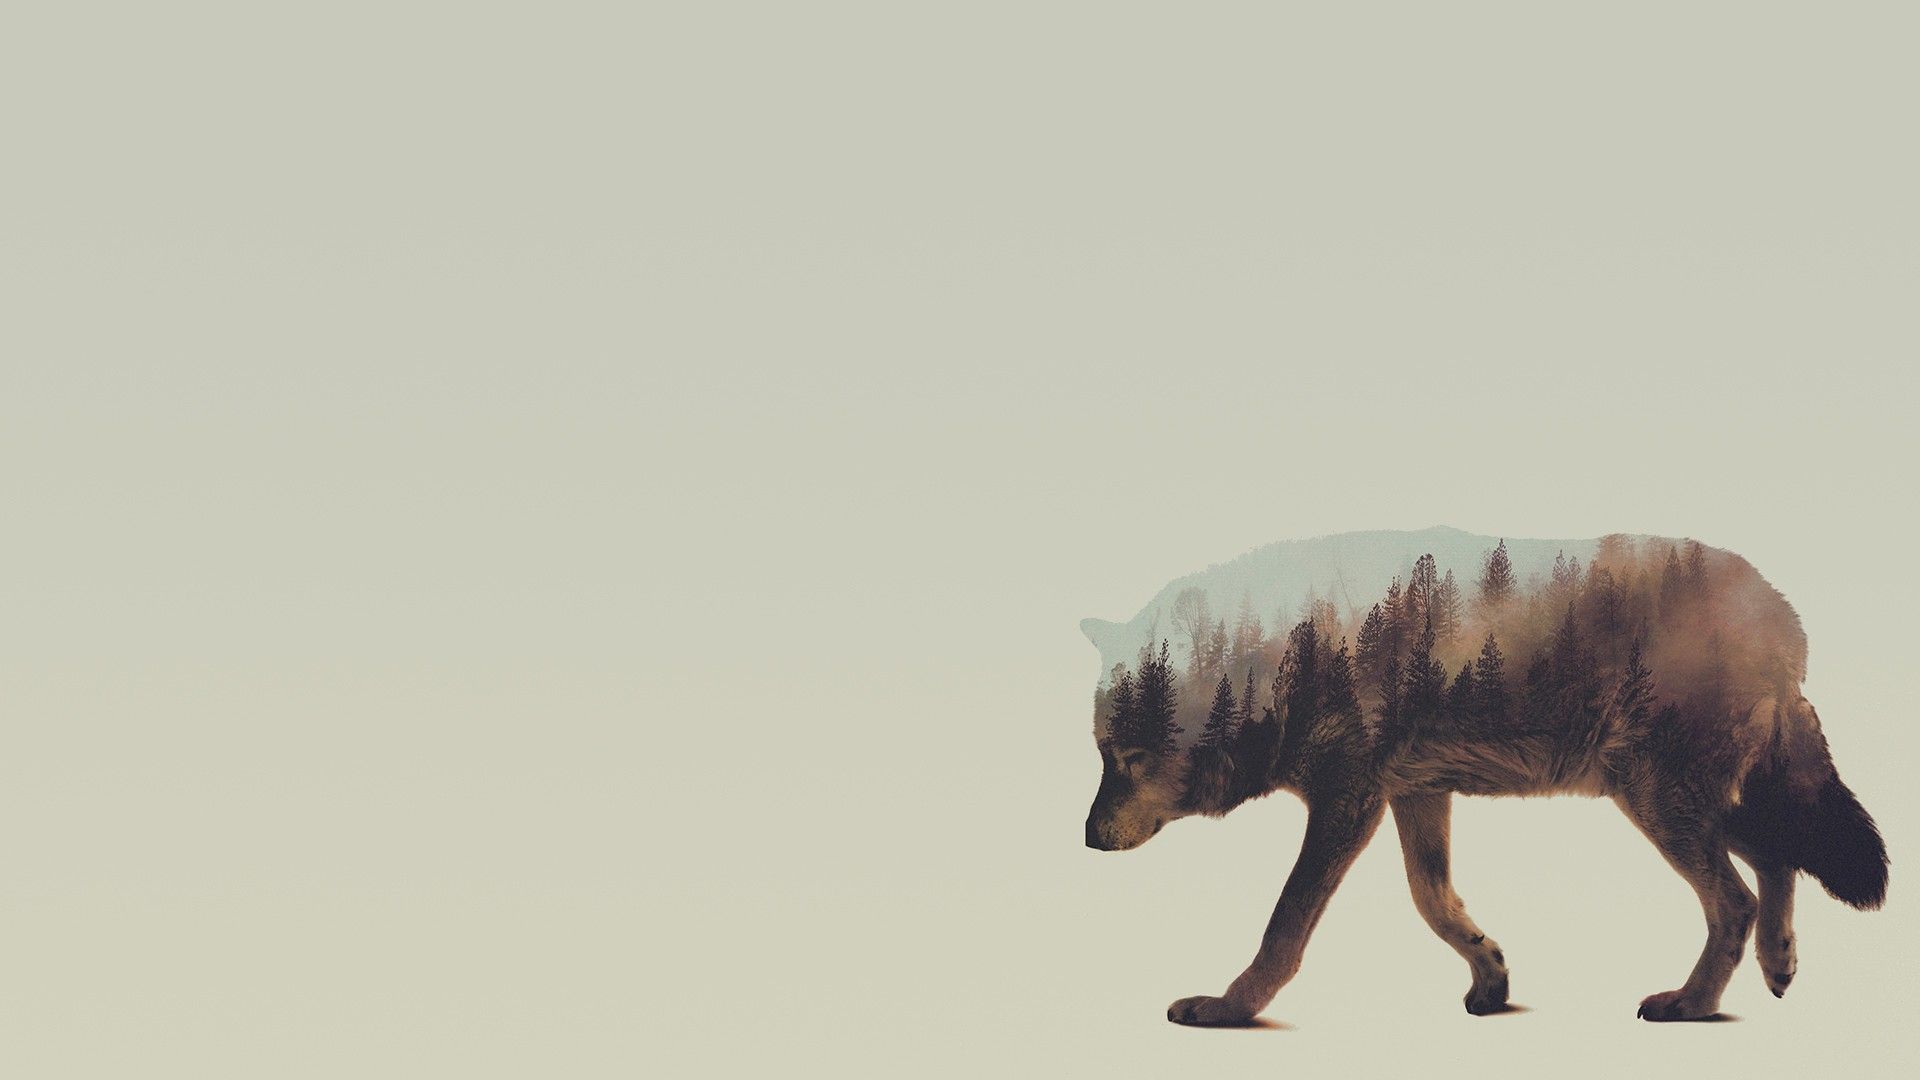 #double exposure, #Andreas Lie, #animals, #wolf wallpaper